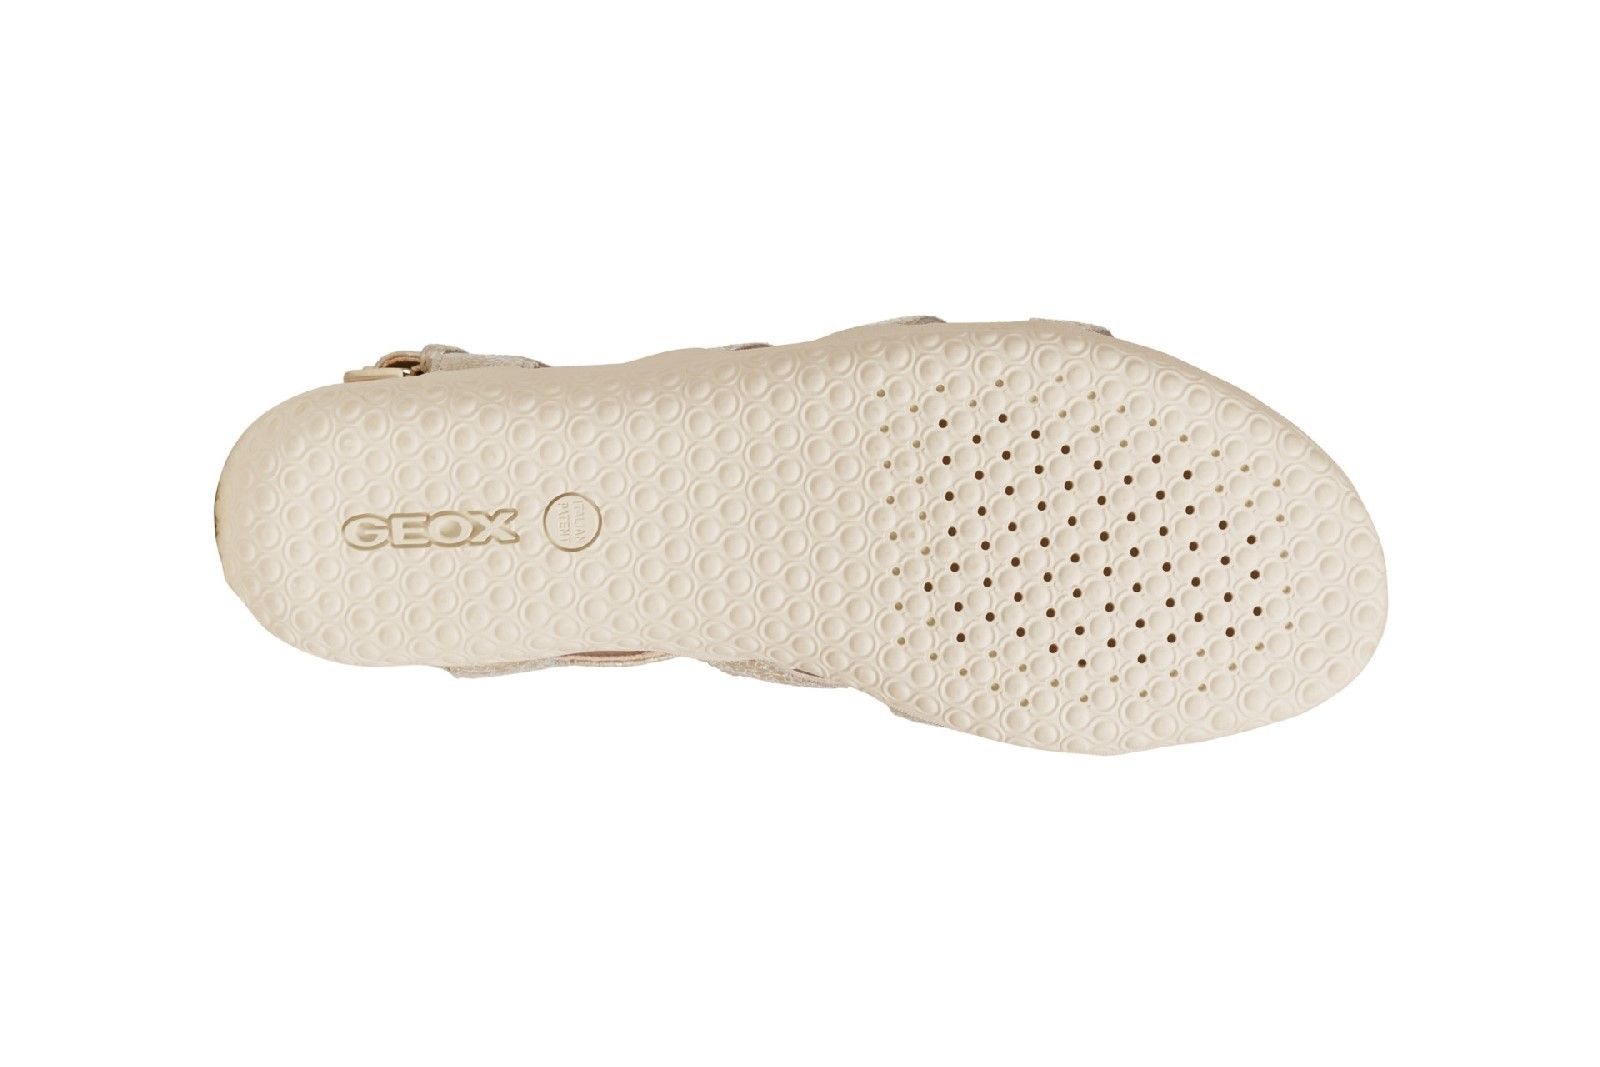 Exclusive patent. The combination of the perforated sole and resistant breathable and waterproof membrane allow for natural temperature regulation, creating the perfect microclimate inside the shoe.It keeps feet dry and comfortable for the whole day.Exclusive Patent. 
Perforated Sole. 
Breathable and waterproof membrane. 
Anti-Slip Outsole.